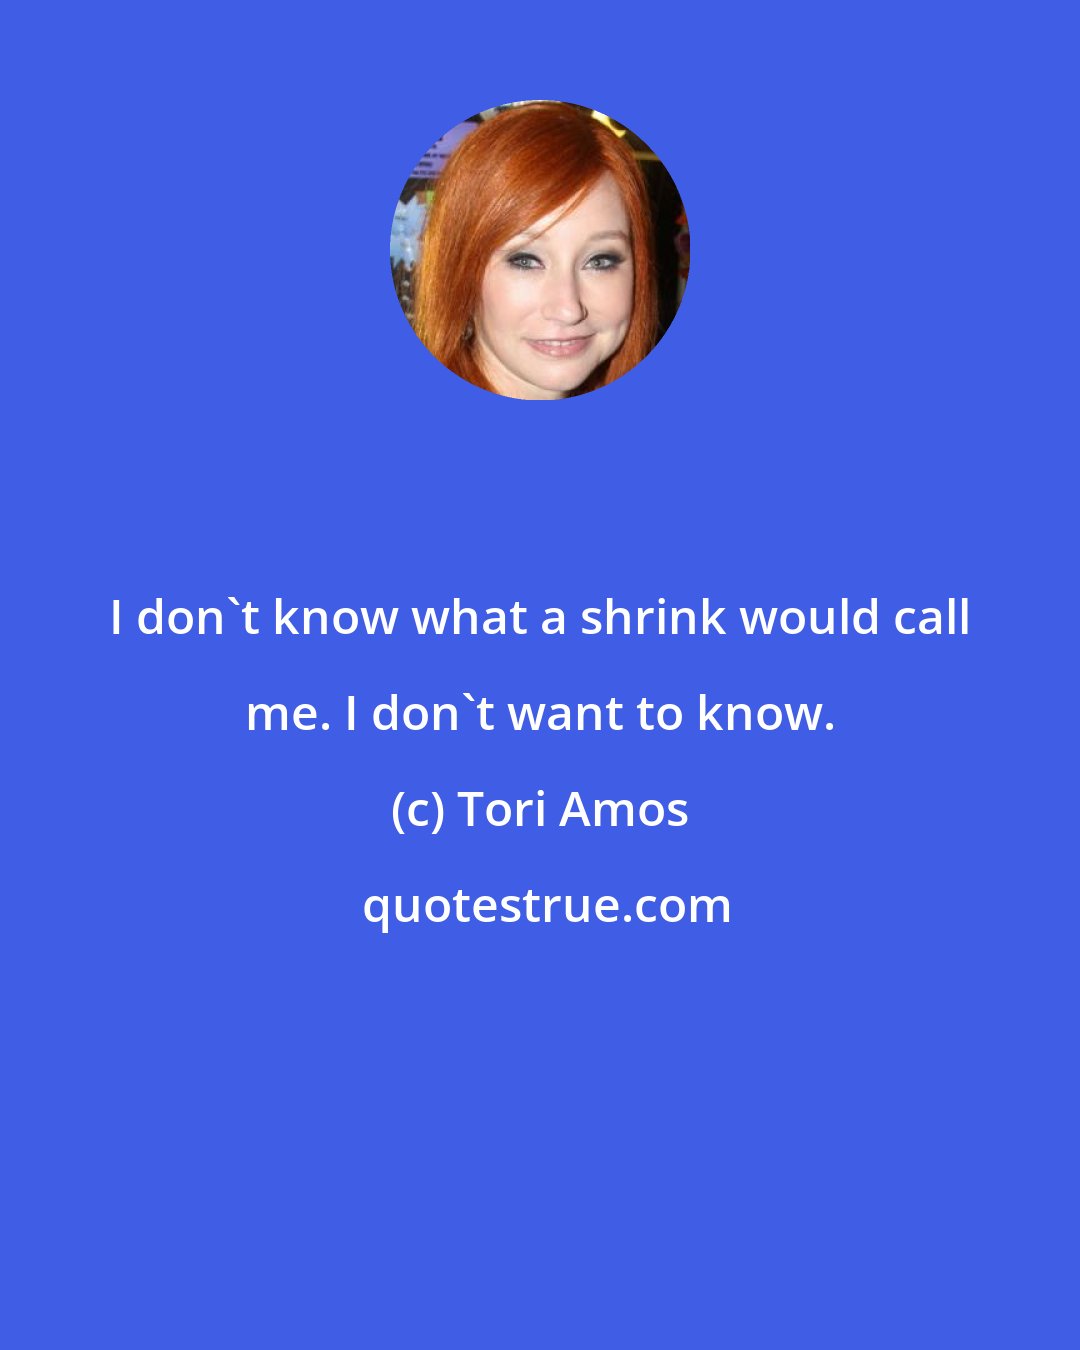 Tori Amos: I don't know what a shrink would call me. I don't want to know.